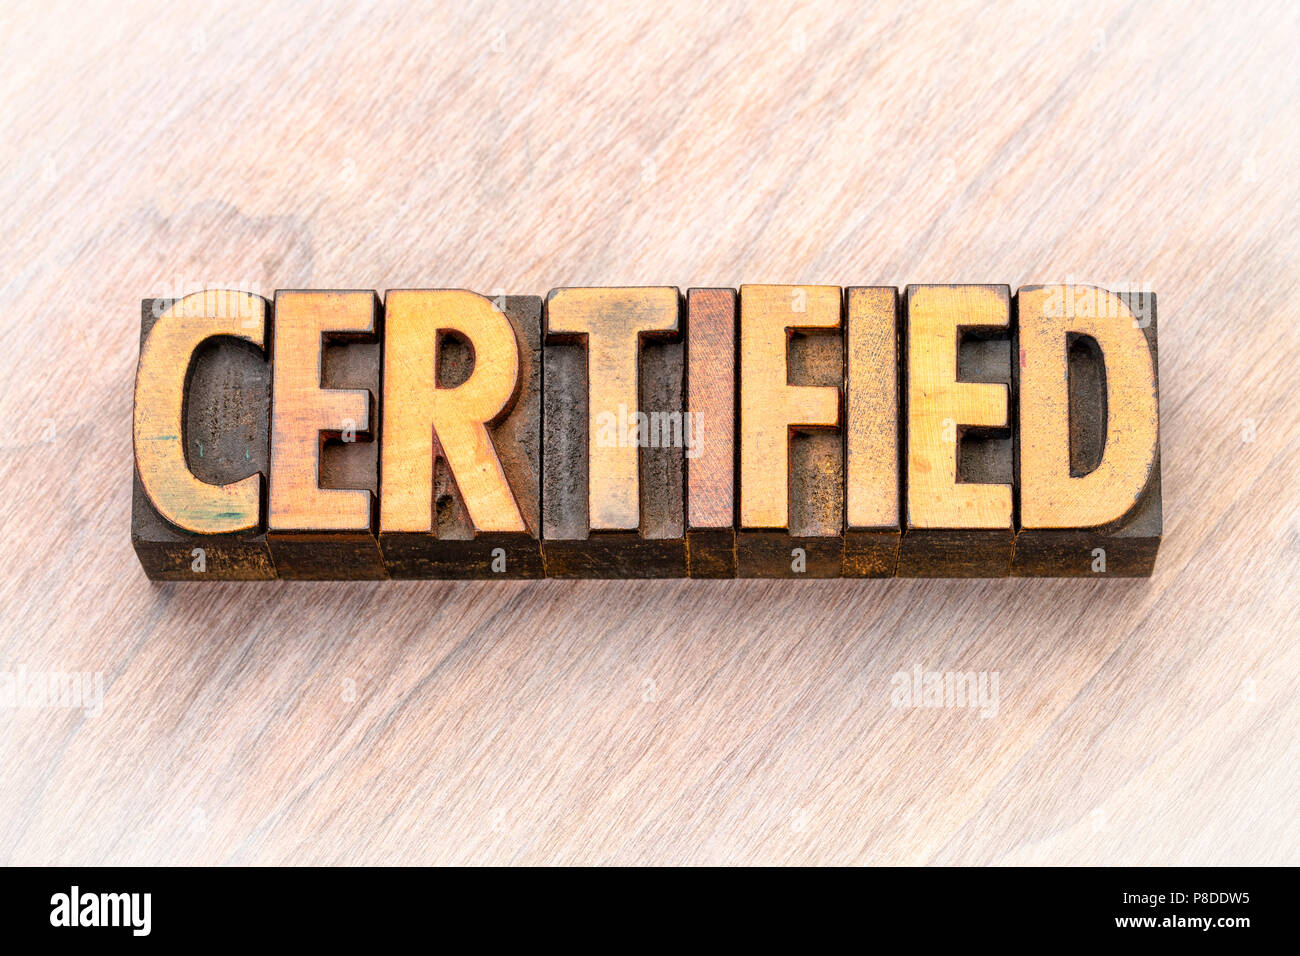 certified word abstract in vintage letterpress wood type Stock Photo